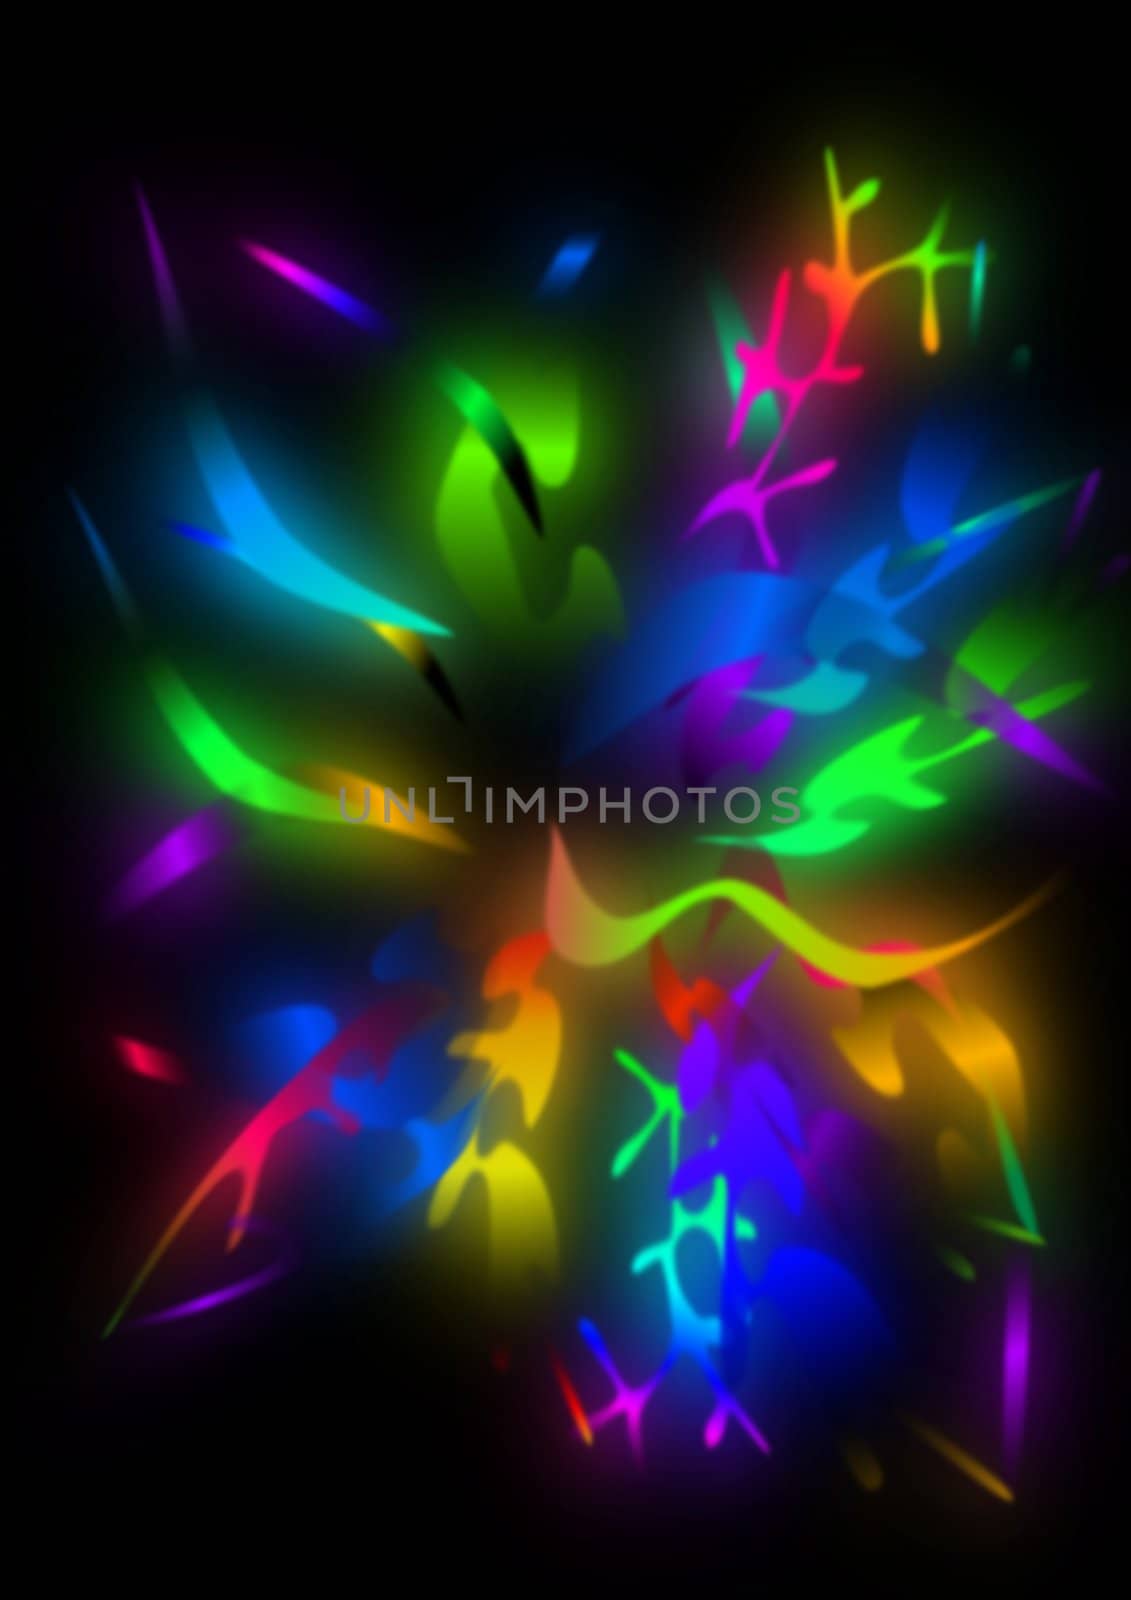 A vector image of an abstract explosion of color.